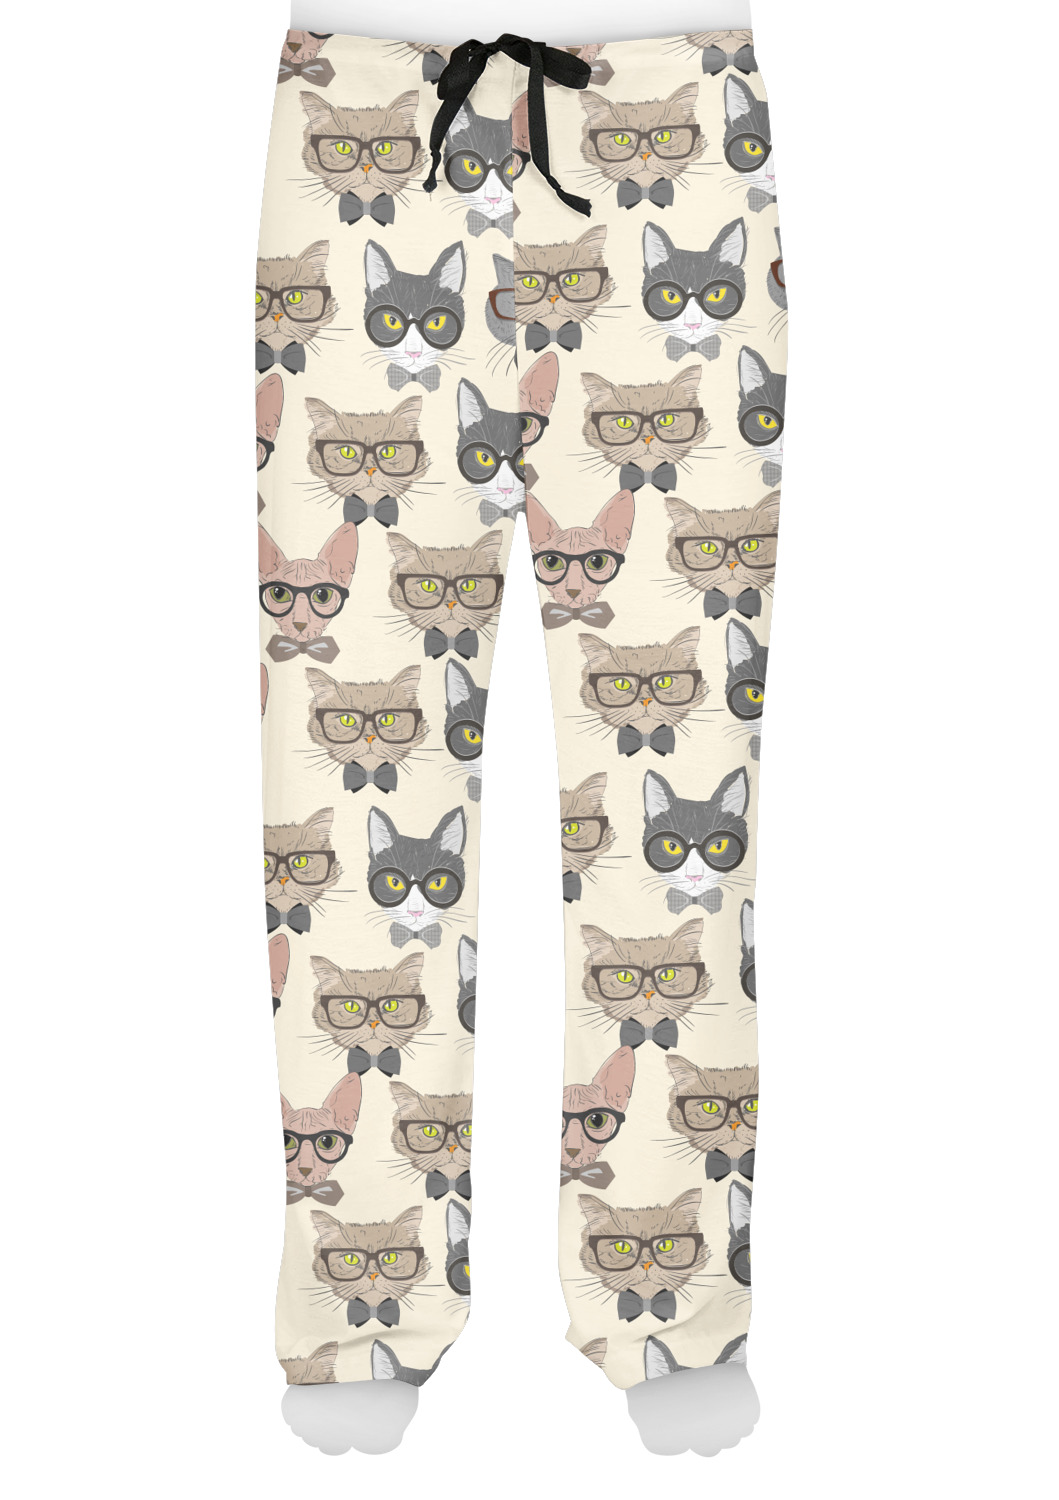 Hipster Cats Mens Pajama Pants - XL (Personalized ...